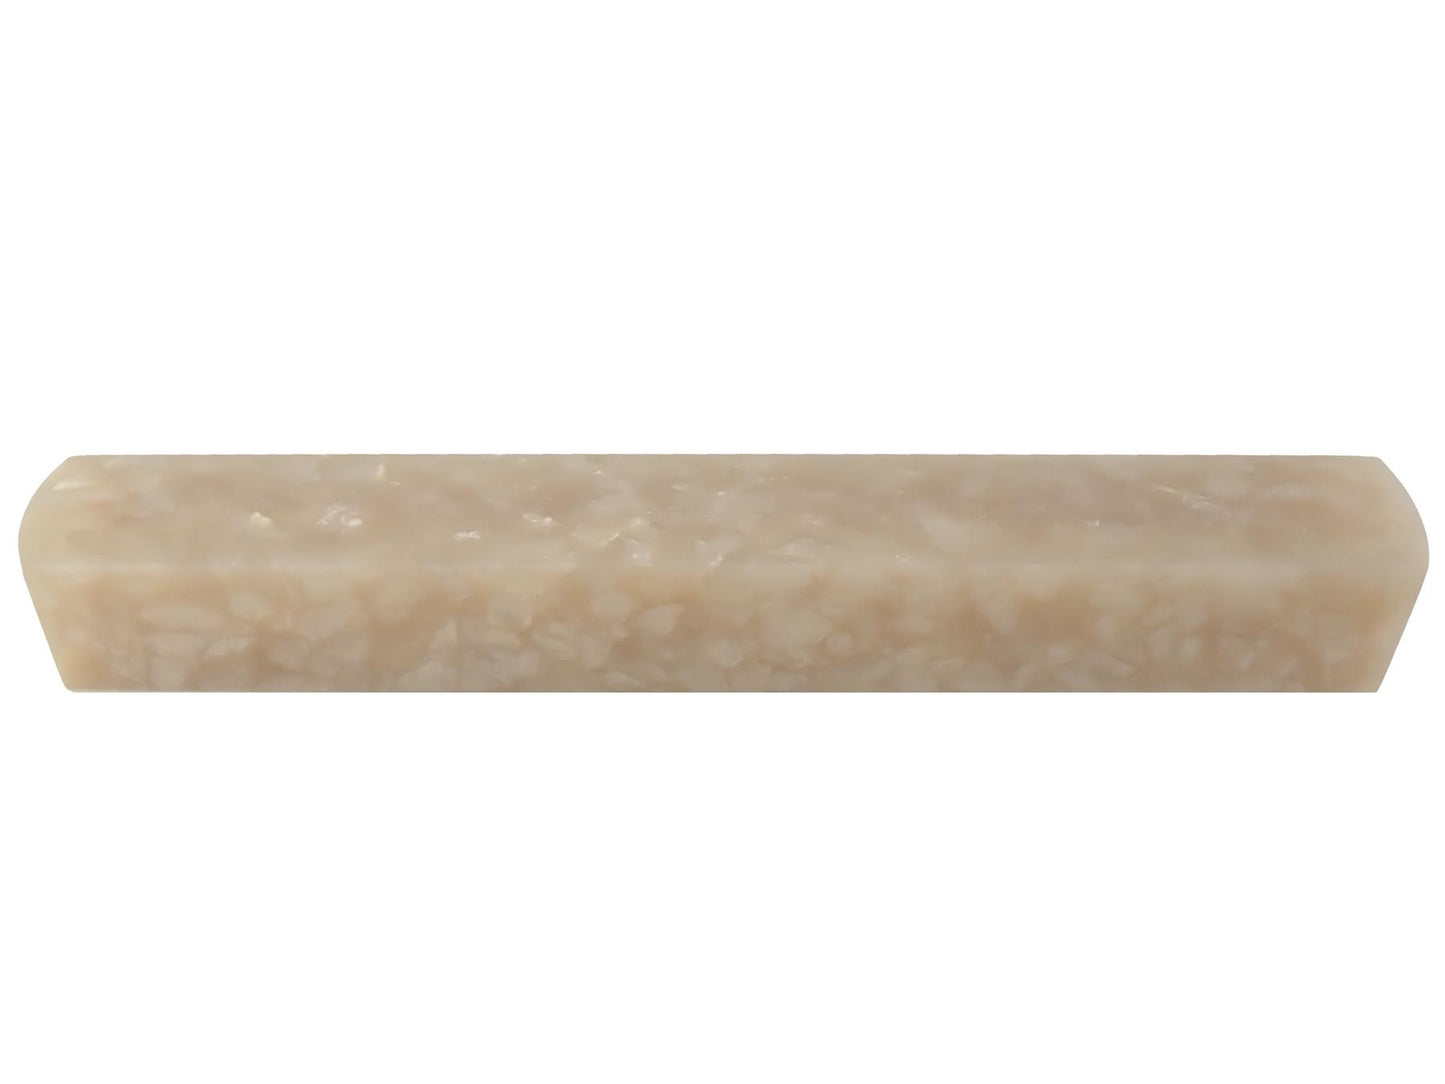 Turners' Mill White Pearloid Cellulose Acetate Pen Blank - 150x20x20mm (5.9x0.79x0.79"), 6x3/4x3/4"